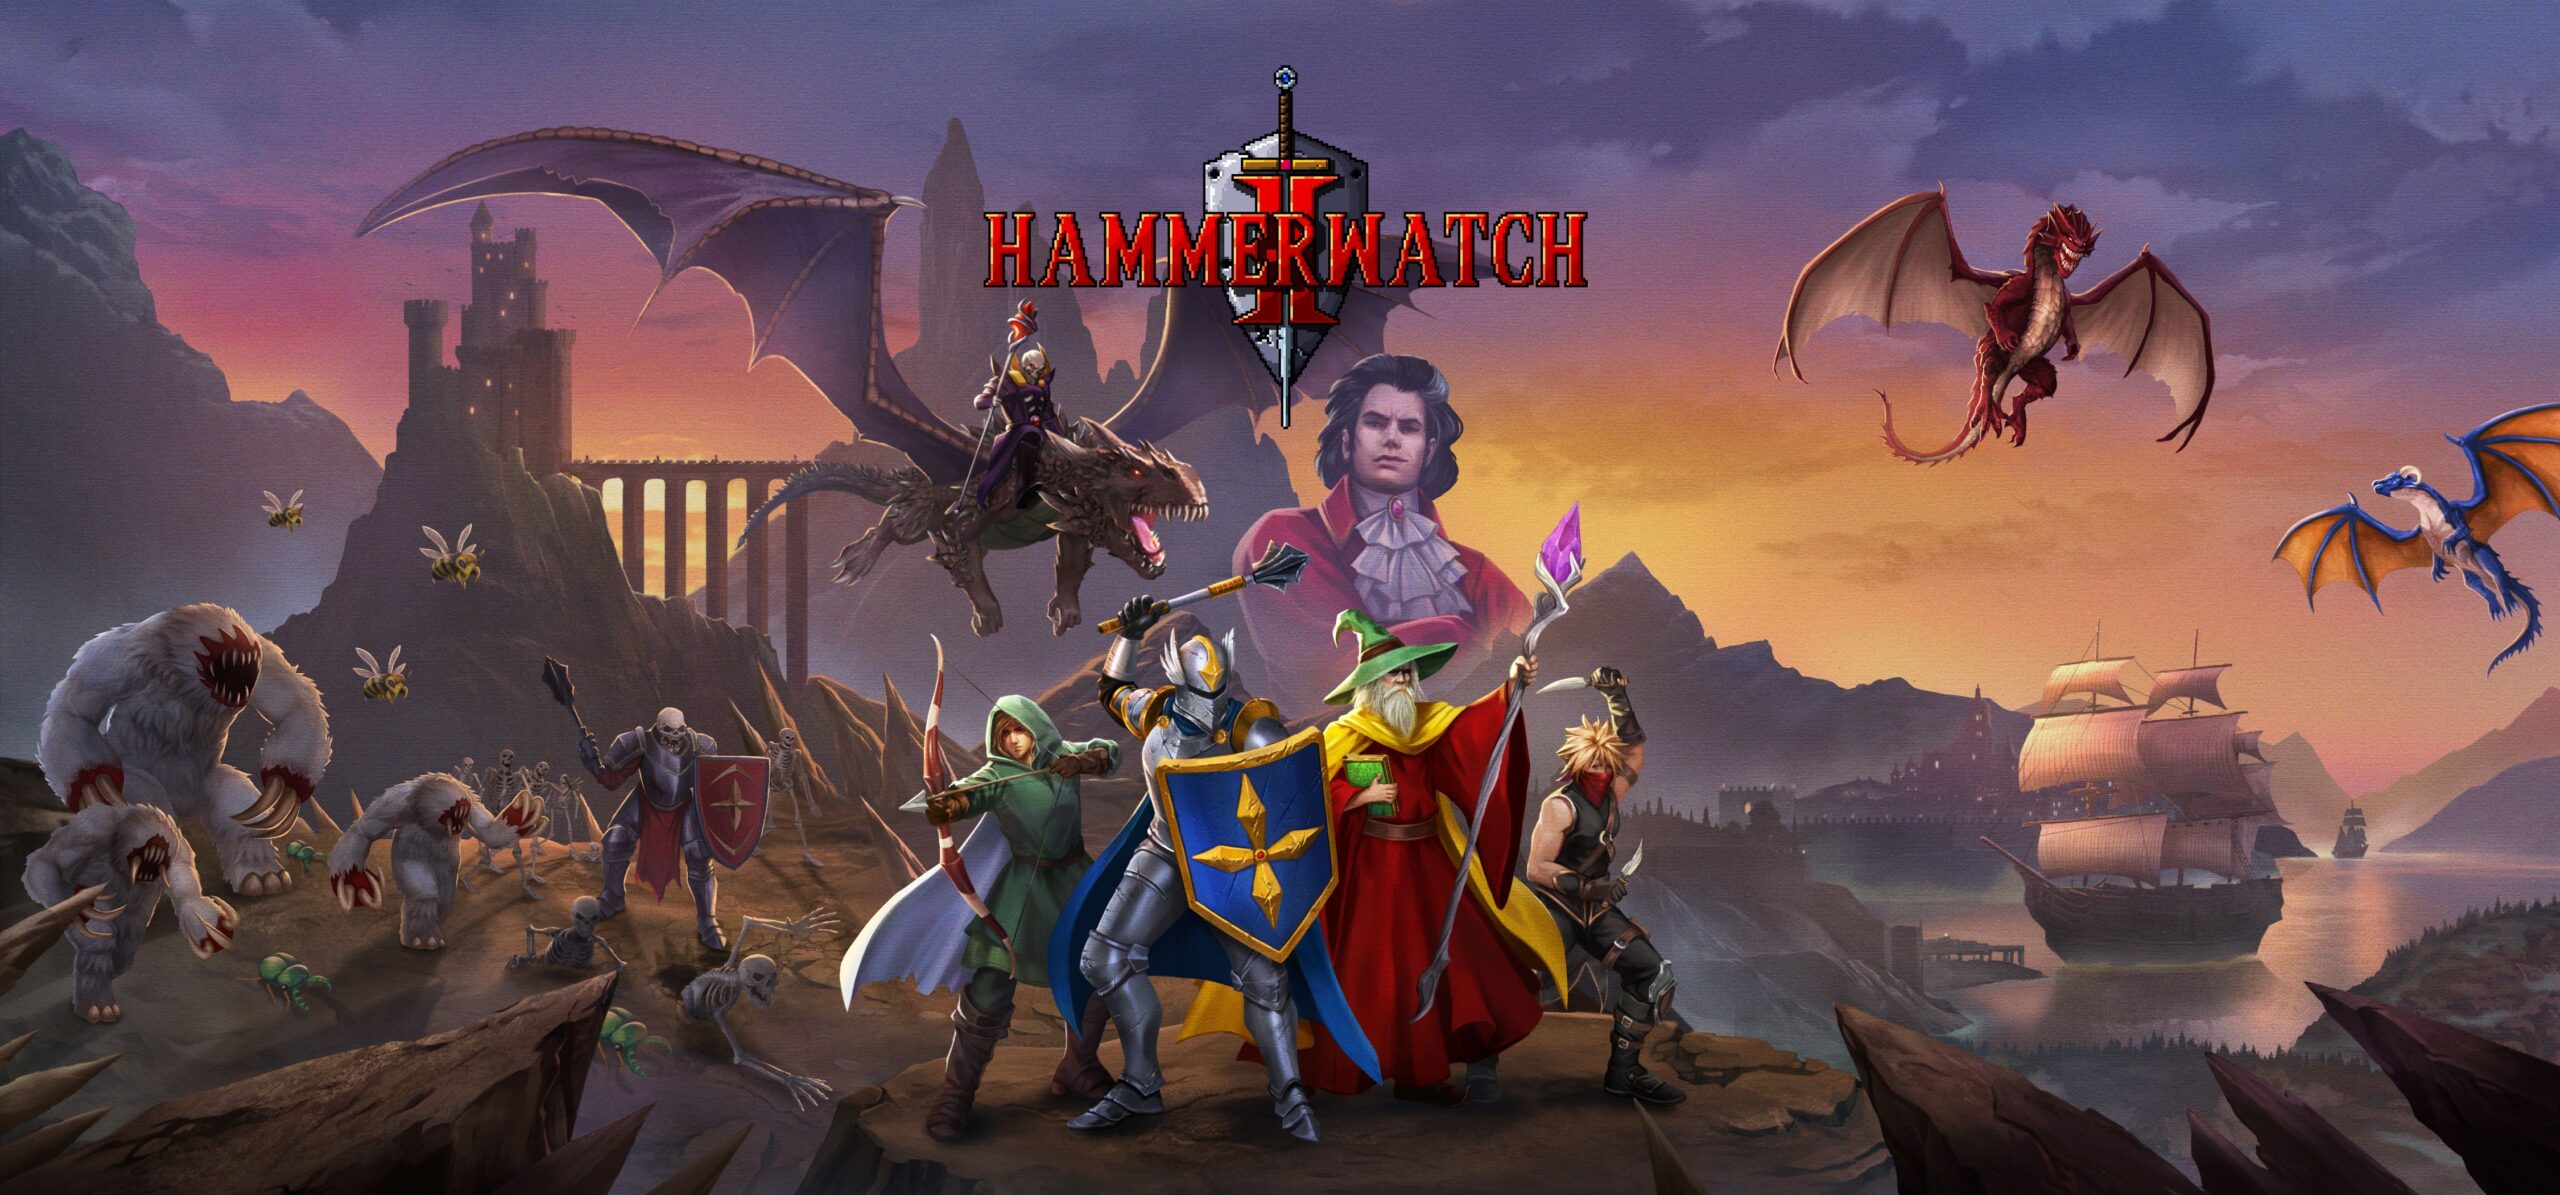 Hammerwatch II Makes Its Epic Debut on PC: Console Players, Stay Tuned!